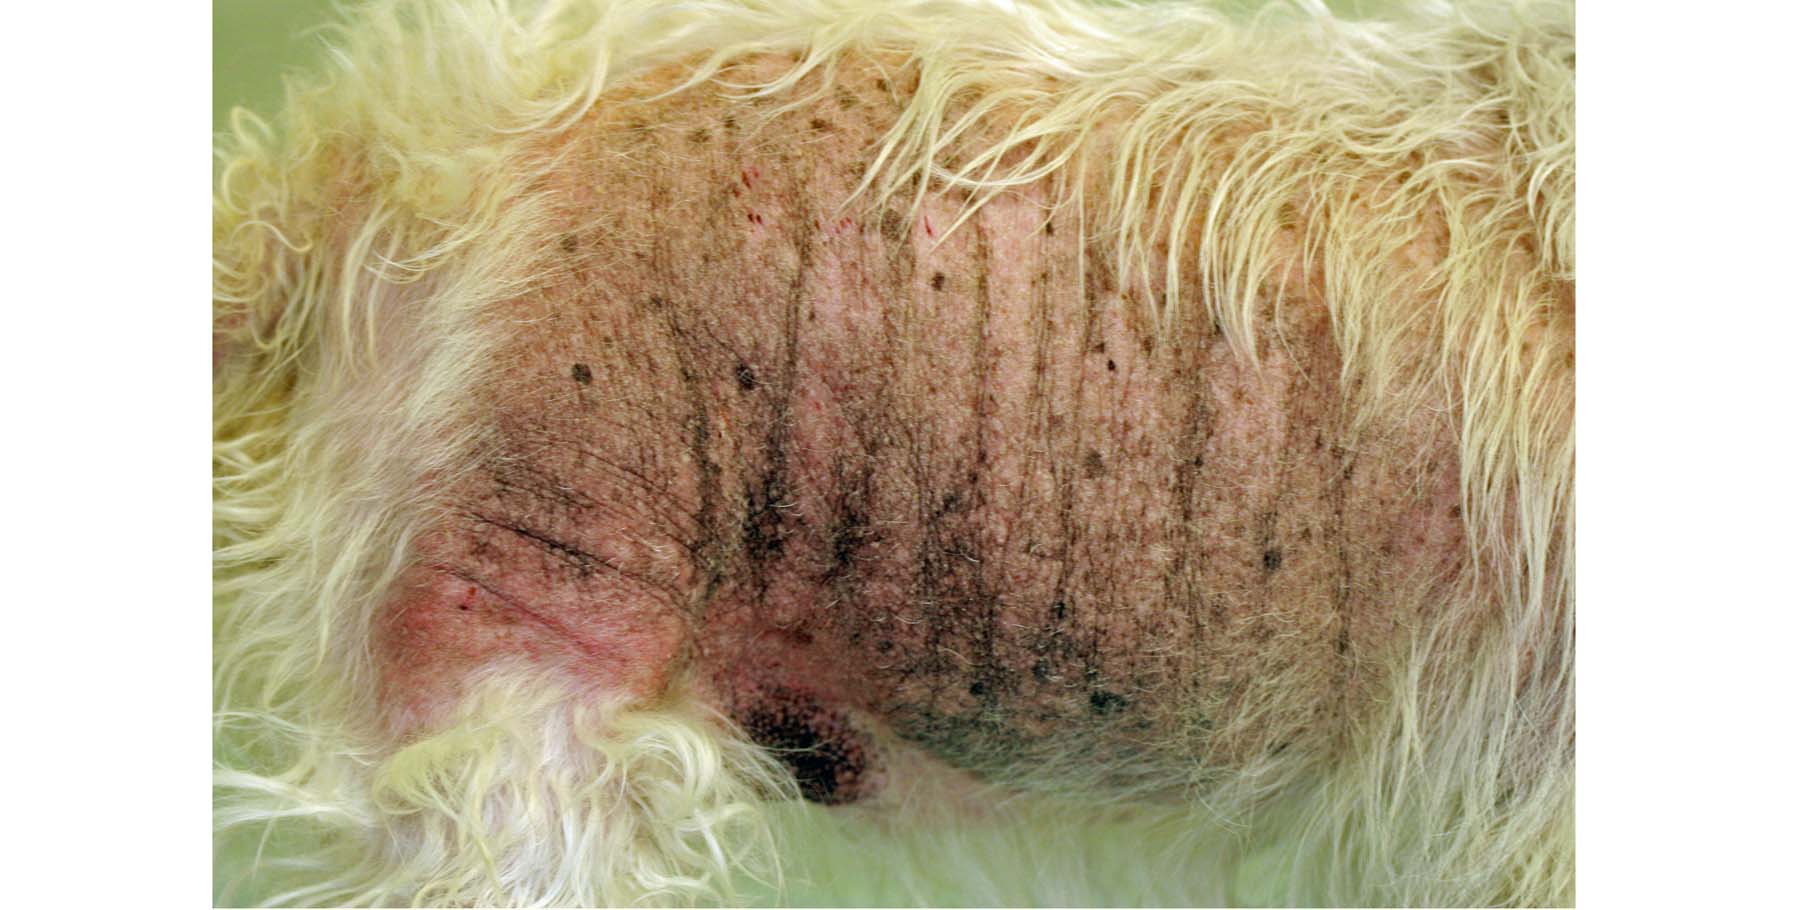 Chronic Atopic Dermatitis - Steroid-induced Alopecia, West Highland White Terrier